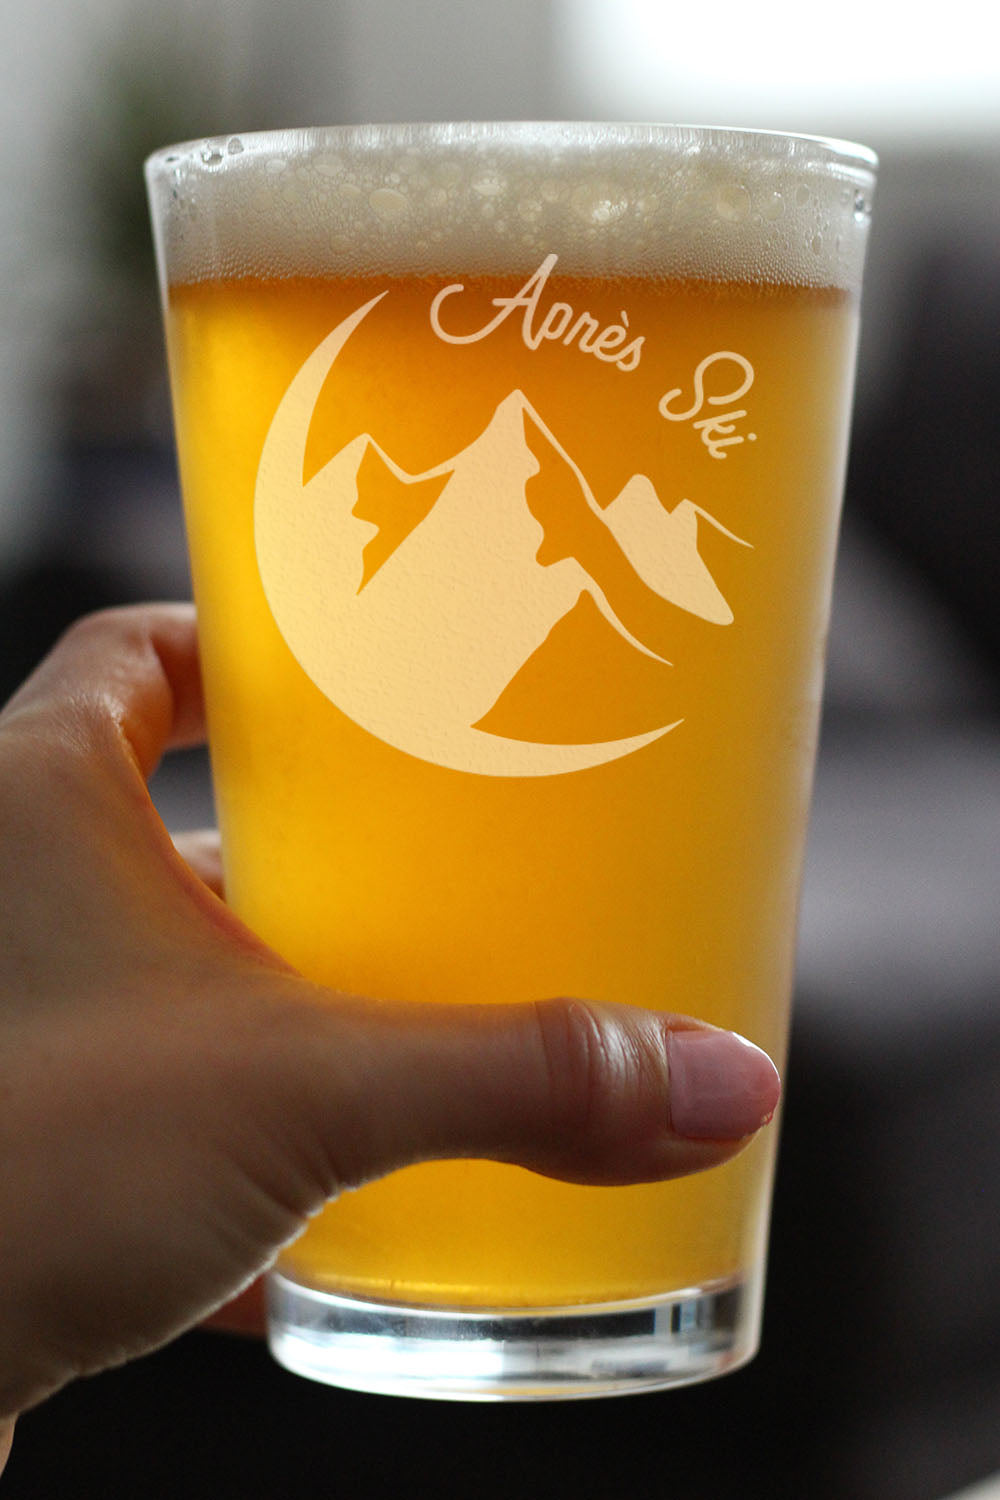 Apres Ski - Pint Glass for Beer - Unique Skiing Themed Decor and Gifts for Mountain Lovers - 16 oz Glasses